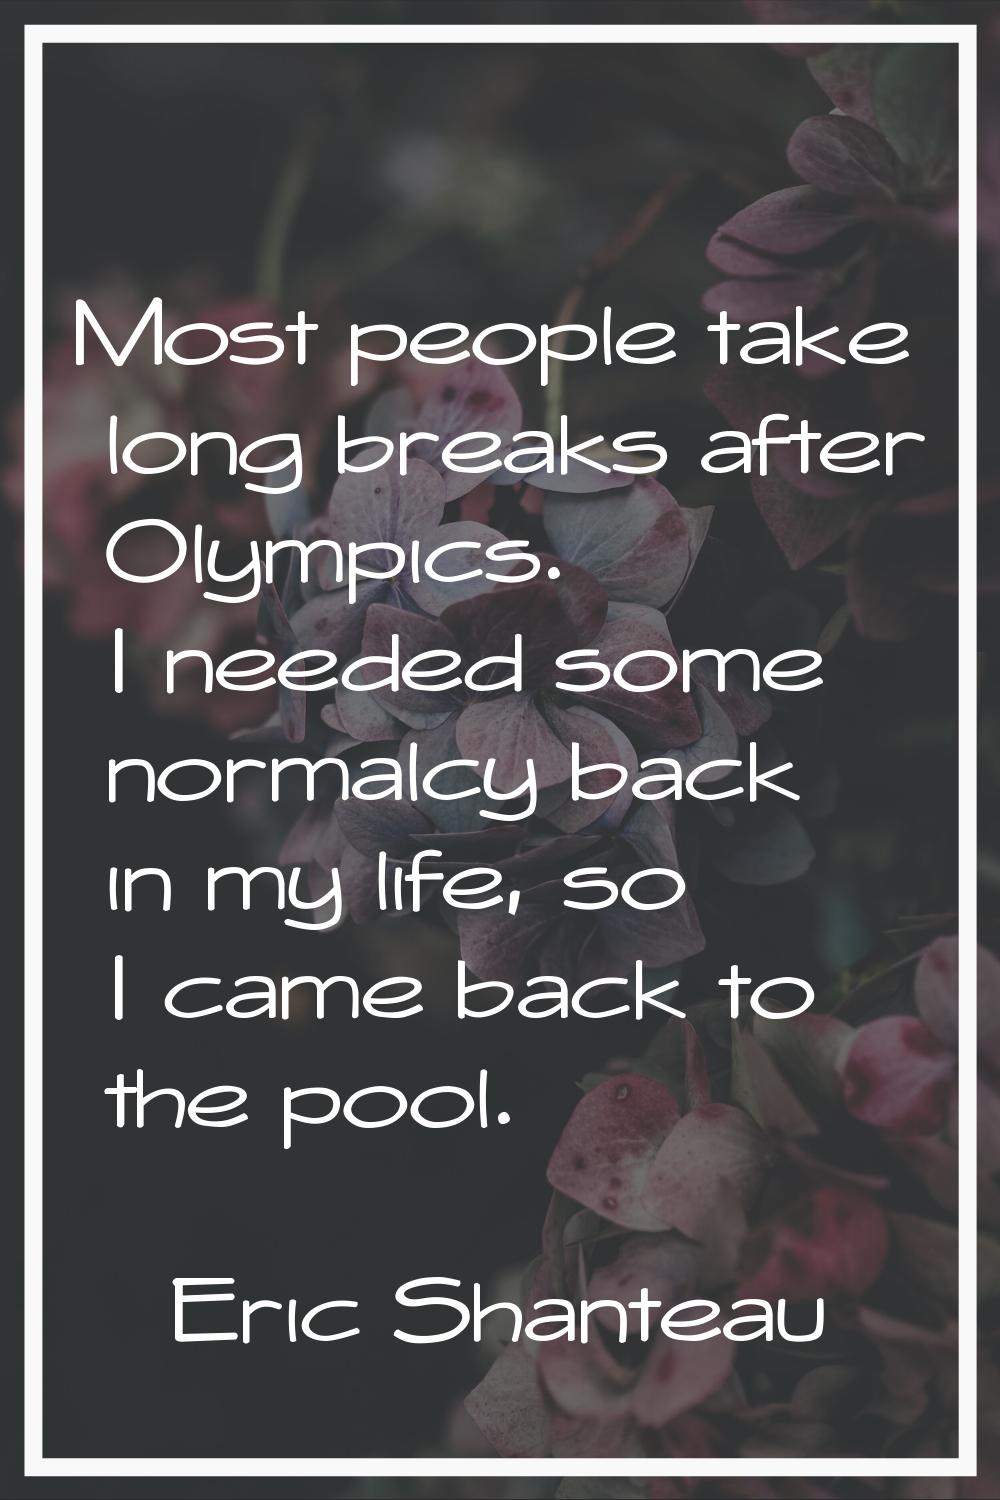 Most people take long breaks after Olympics. I needed some normalcy back in my life, so I came back